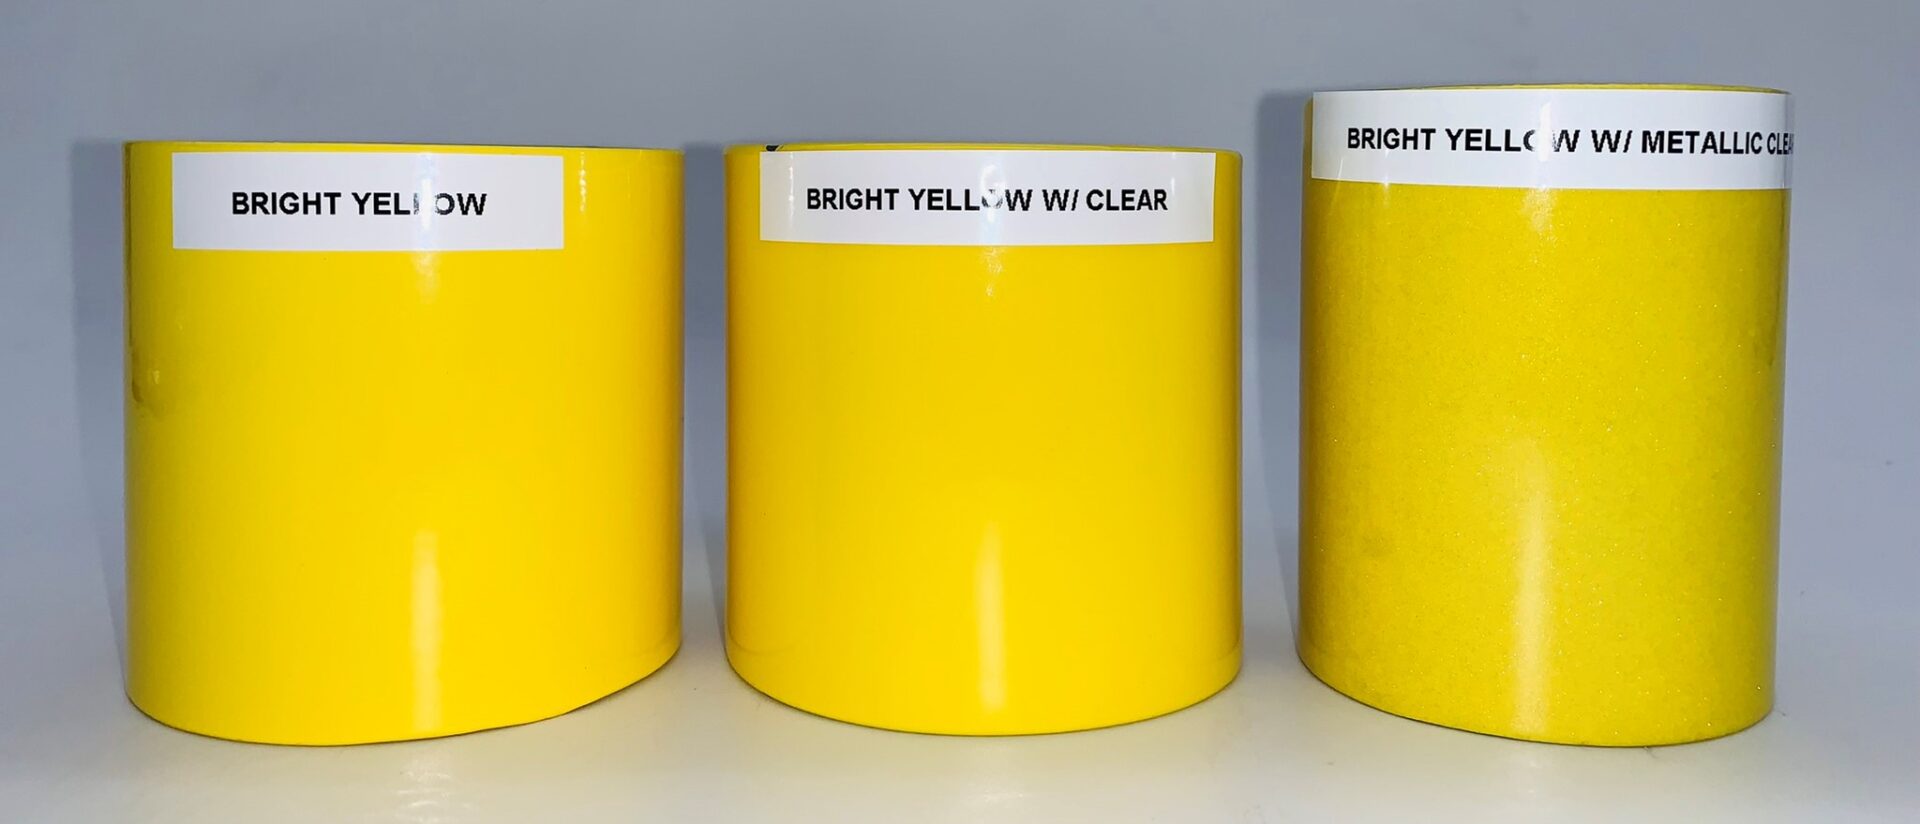 Three bright yellow with metallic clear